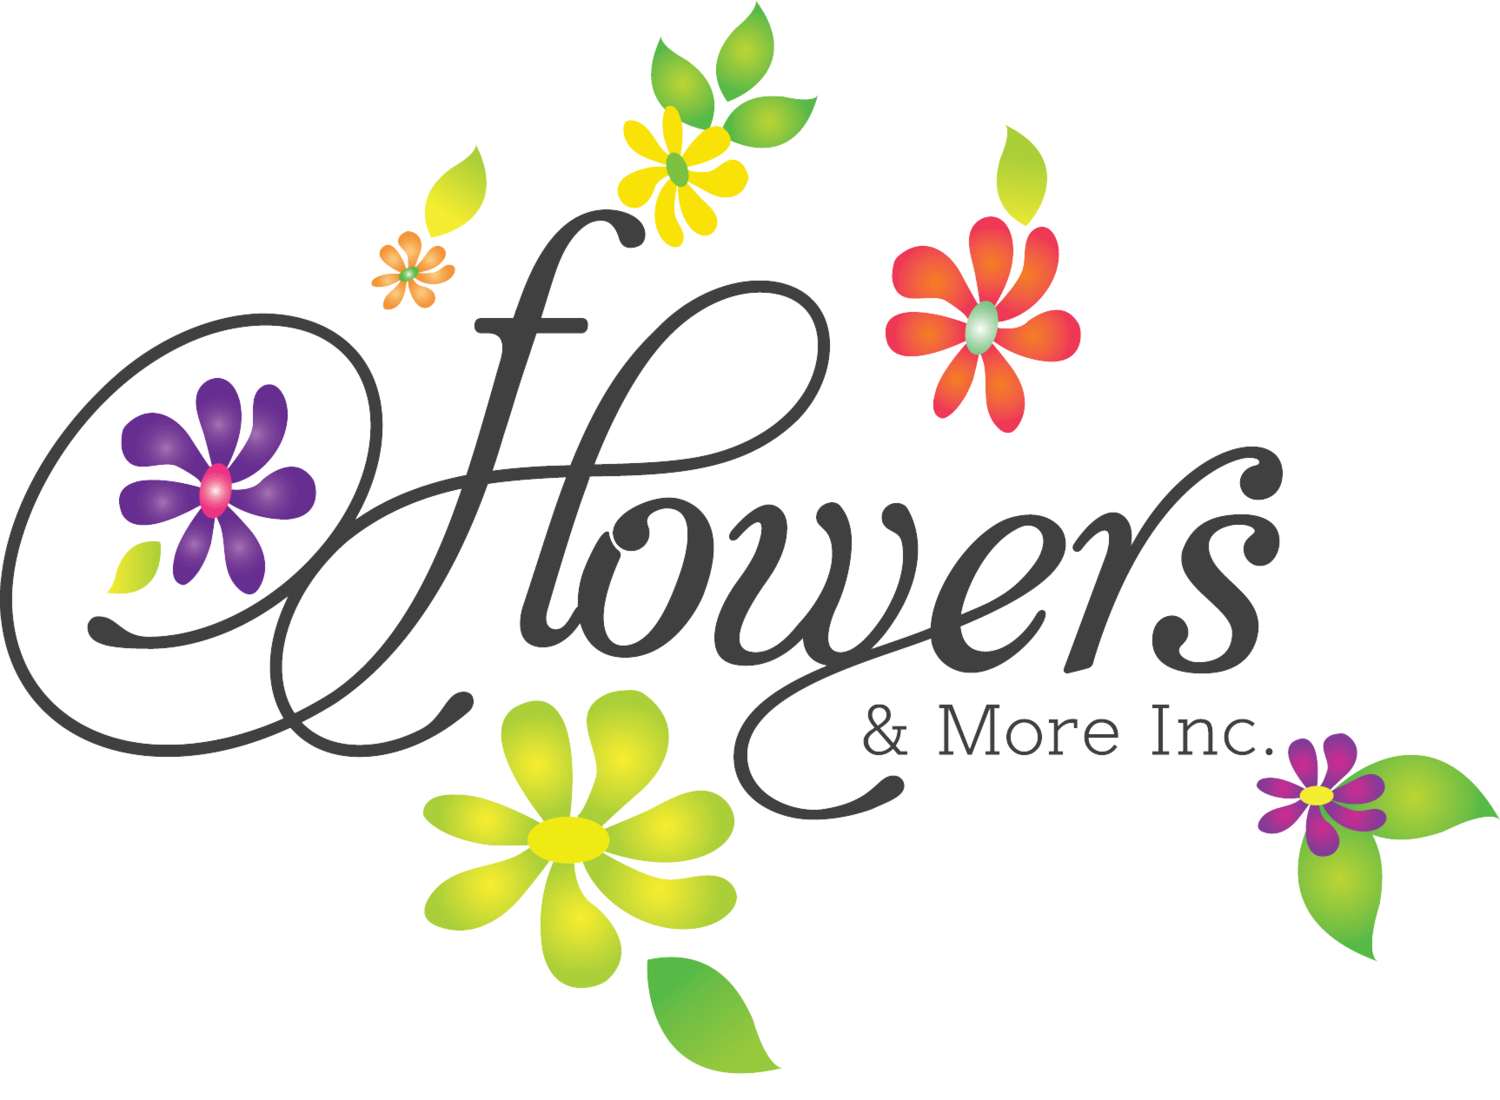 Funeral Flowers by Flowers & More Inc.